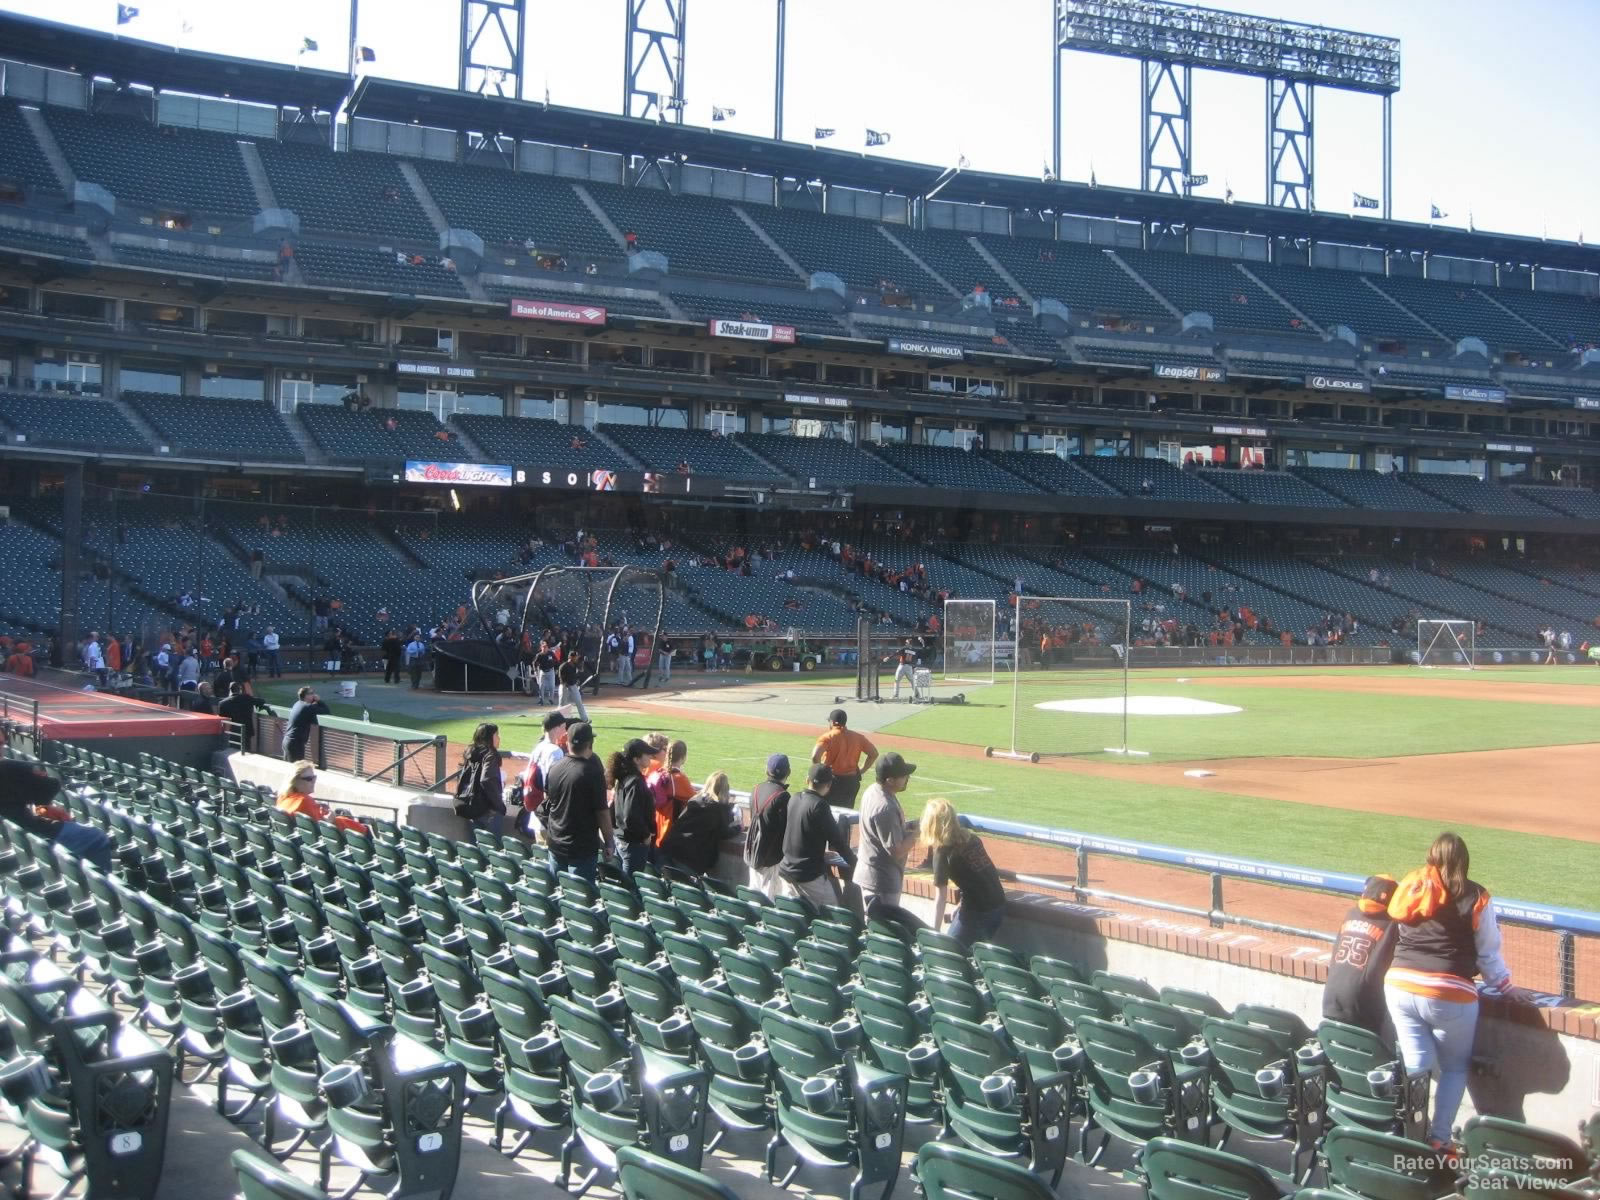 Giants Seating Chart With Rows